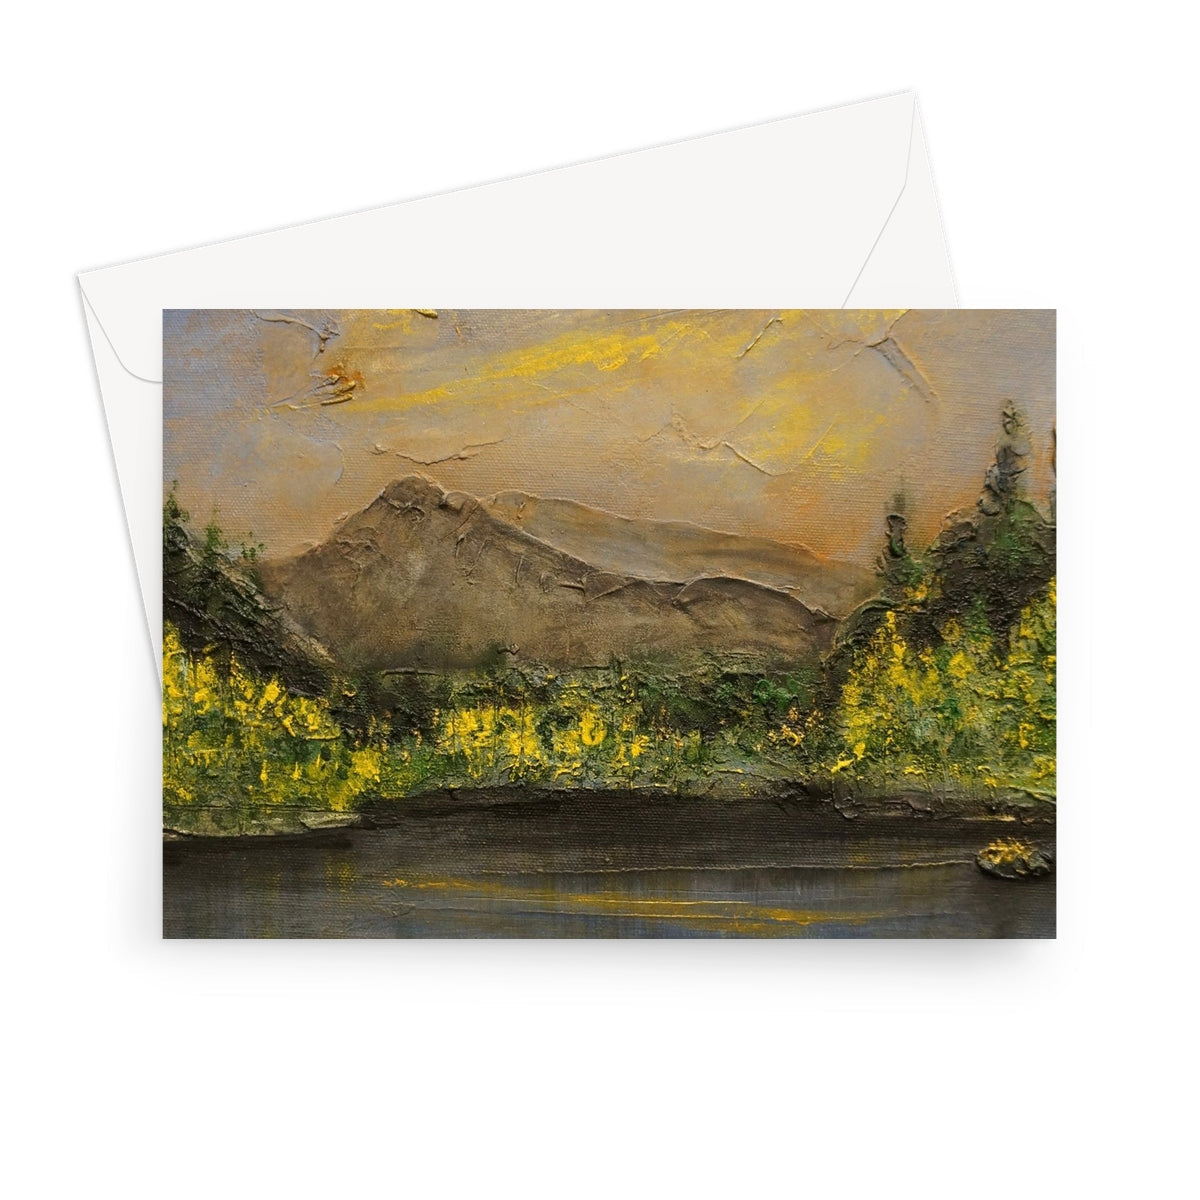 Glencoe Lochan Dusk Art Gifts Greeting Card-Greetings Cards-Scottish Lochs & Mountains Art Gallery-7"x5"-10 Cards-Paintings, Prints, Homeware, Art Gifts From Scotland By Scottish Artist Kevin Hunter